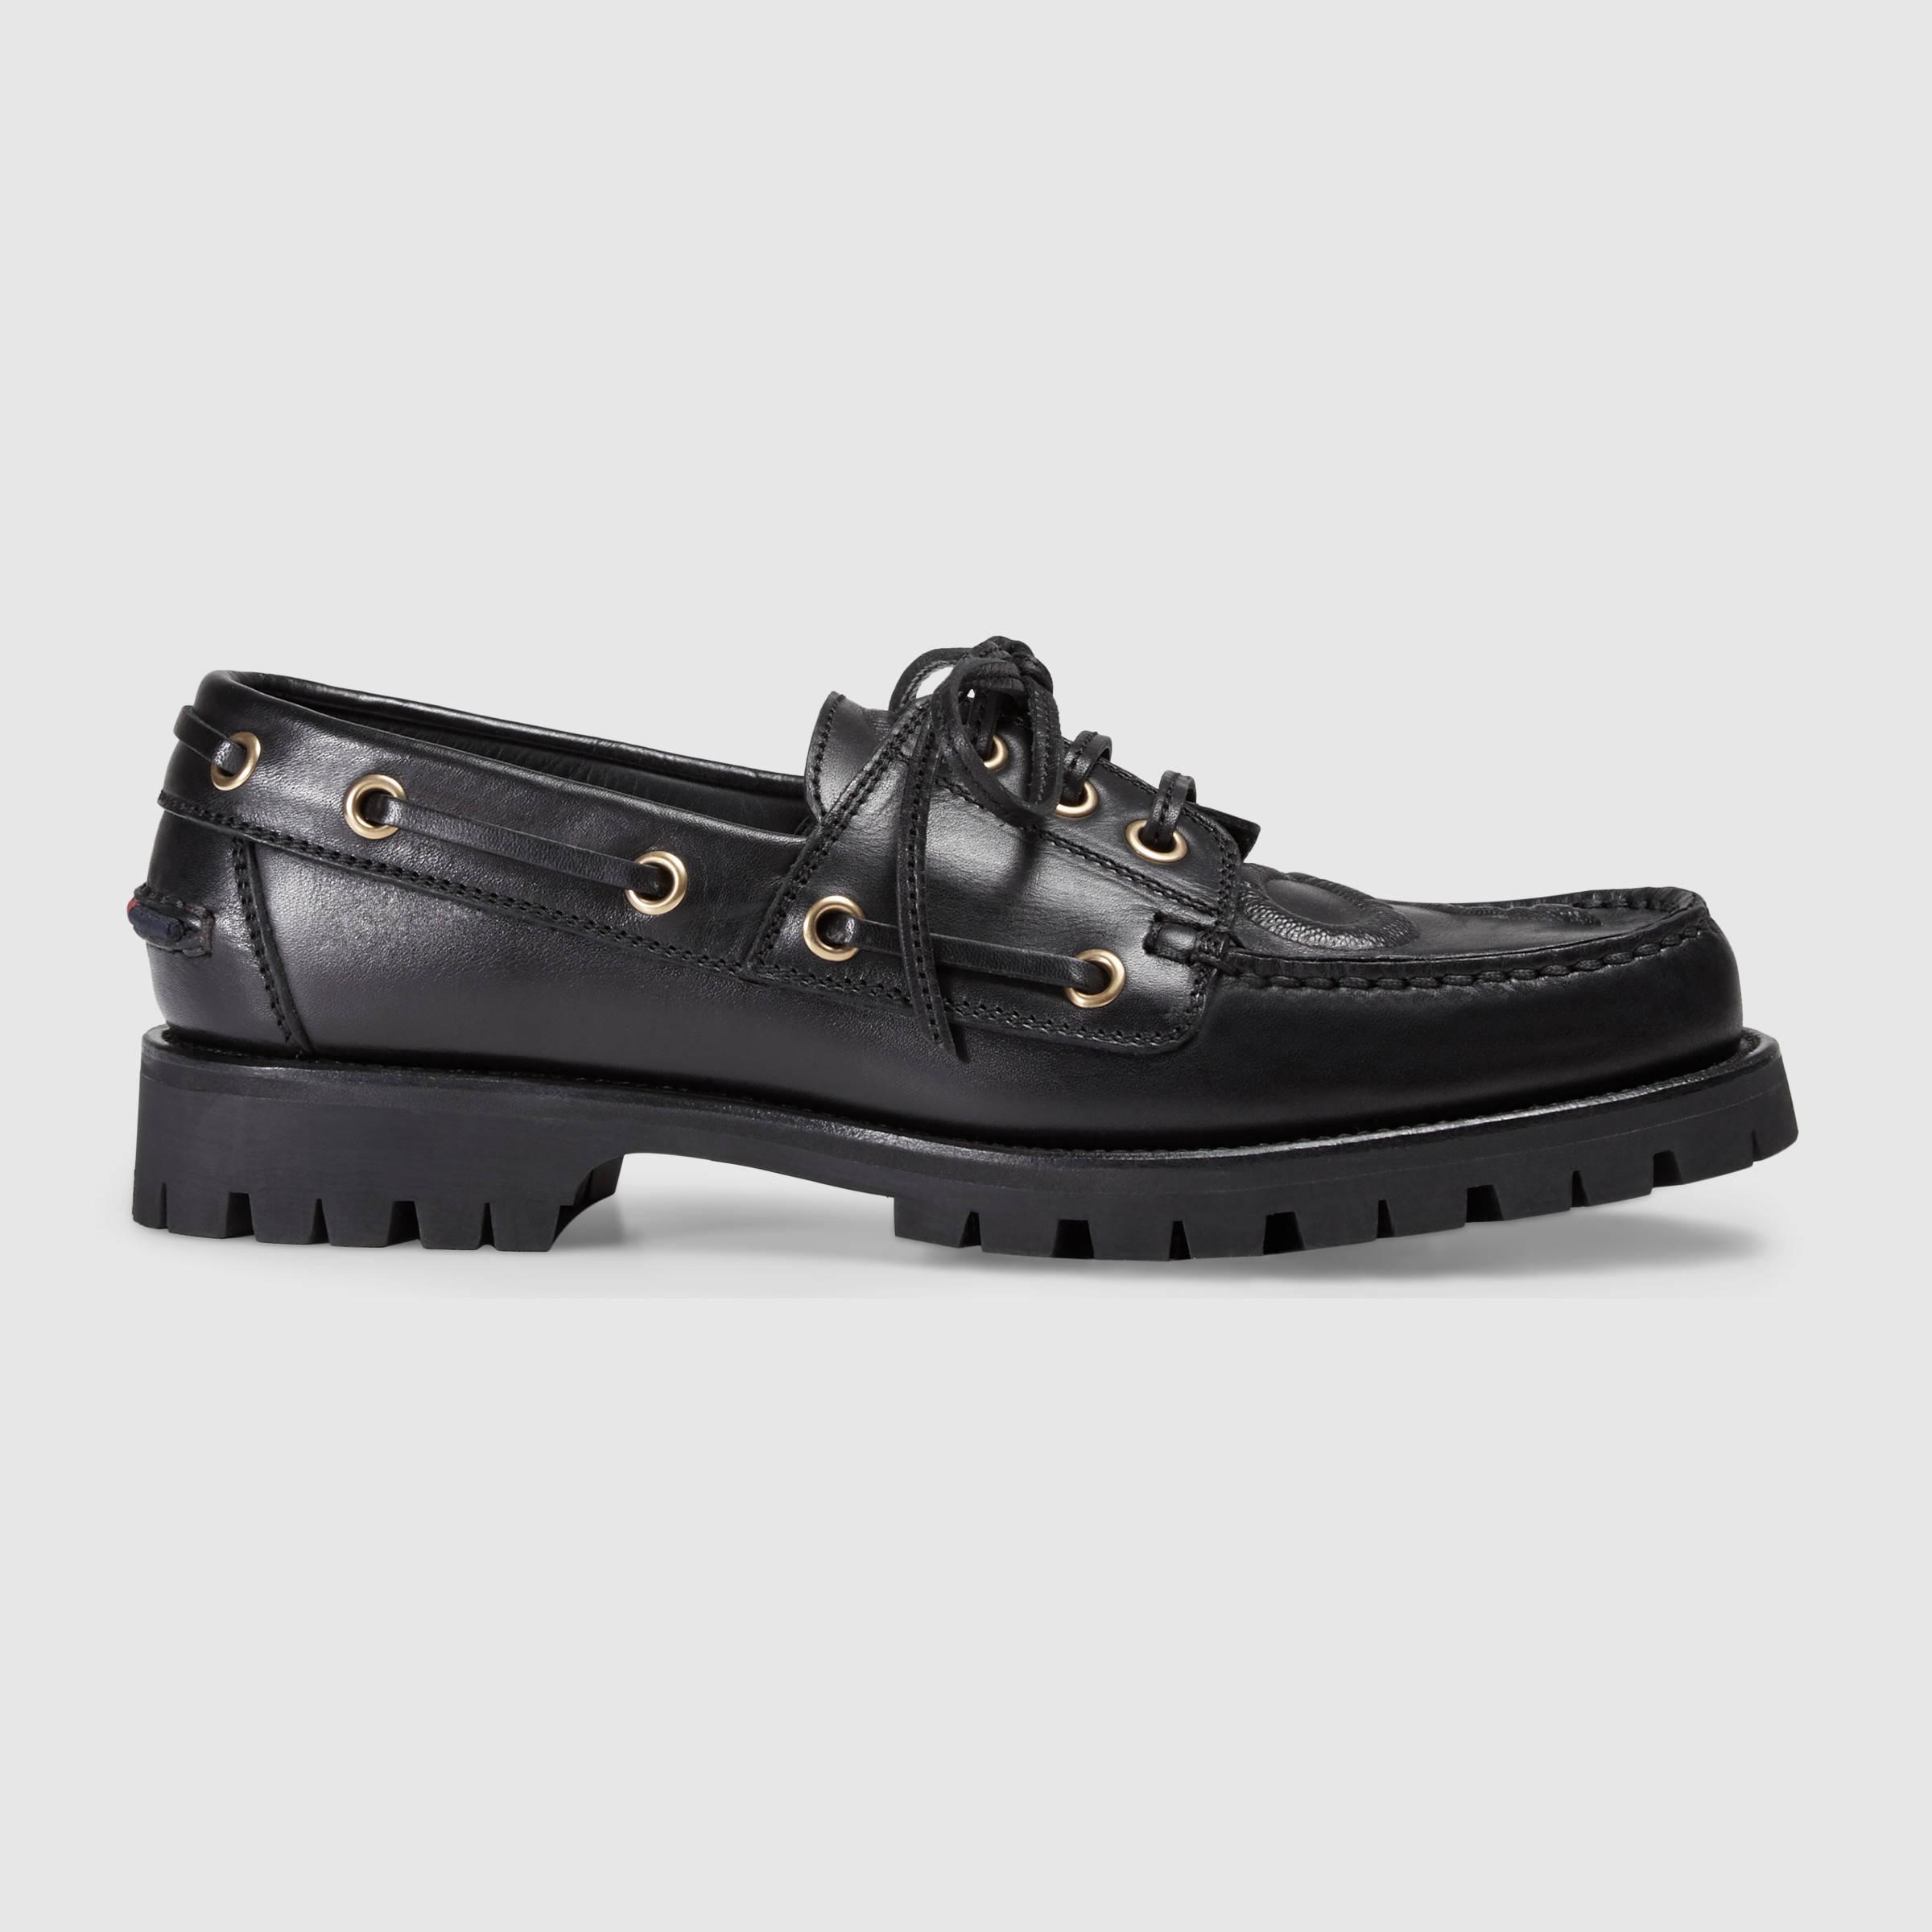 Lyst - Gucci Snake Embossed Lug Sole Loafer in Brown for Men